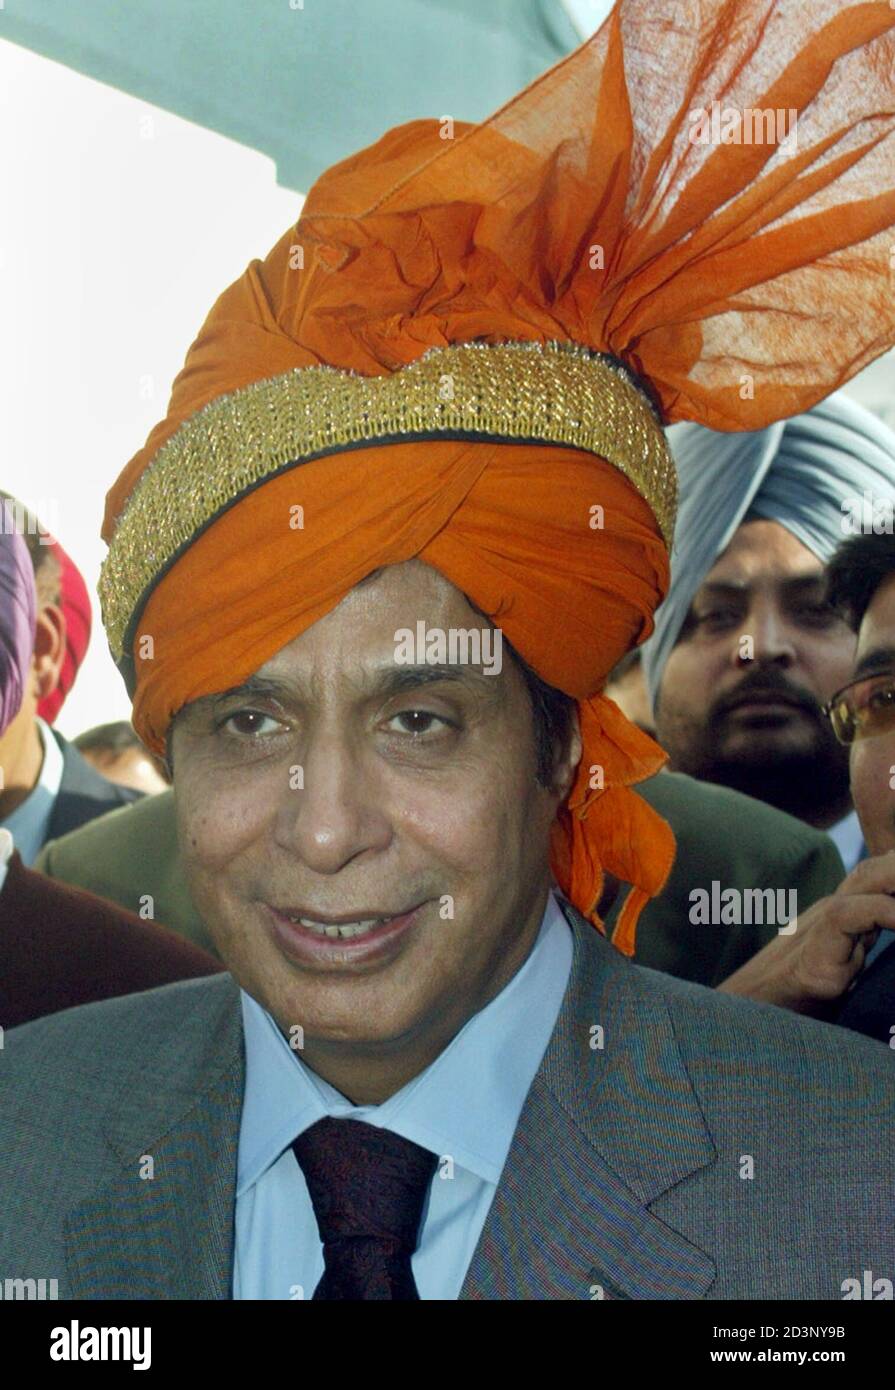 Chaudhry Pervaiz Elahi, chief minister of Pakistan's Punjab province, is seen at the Confederation of Indian Industry (CII) fair in the northern Indian city of Chandigarh December 3, 2004. REUTERS/Ajay Verma  AH/TW Stock Photo